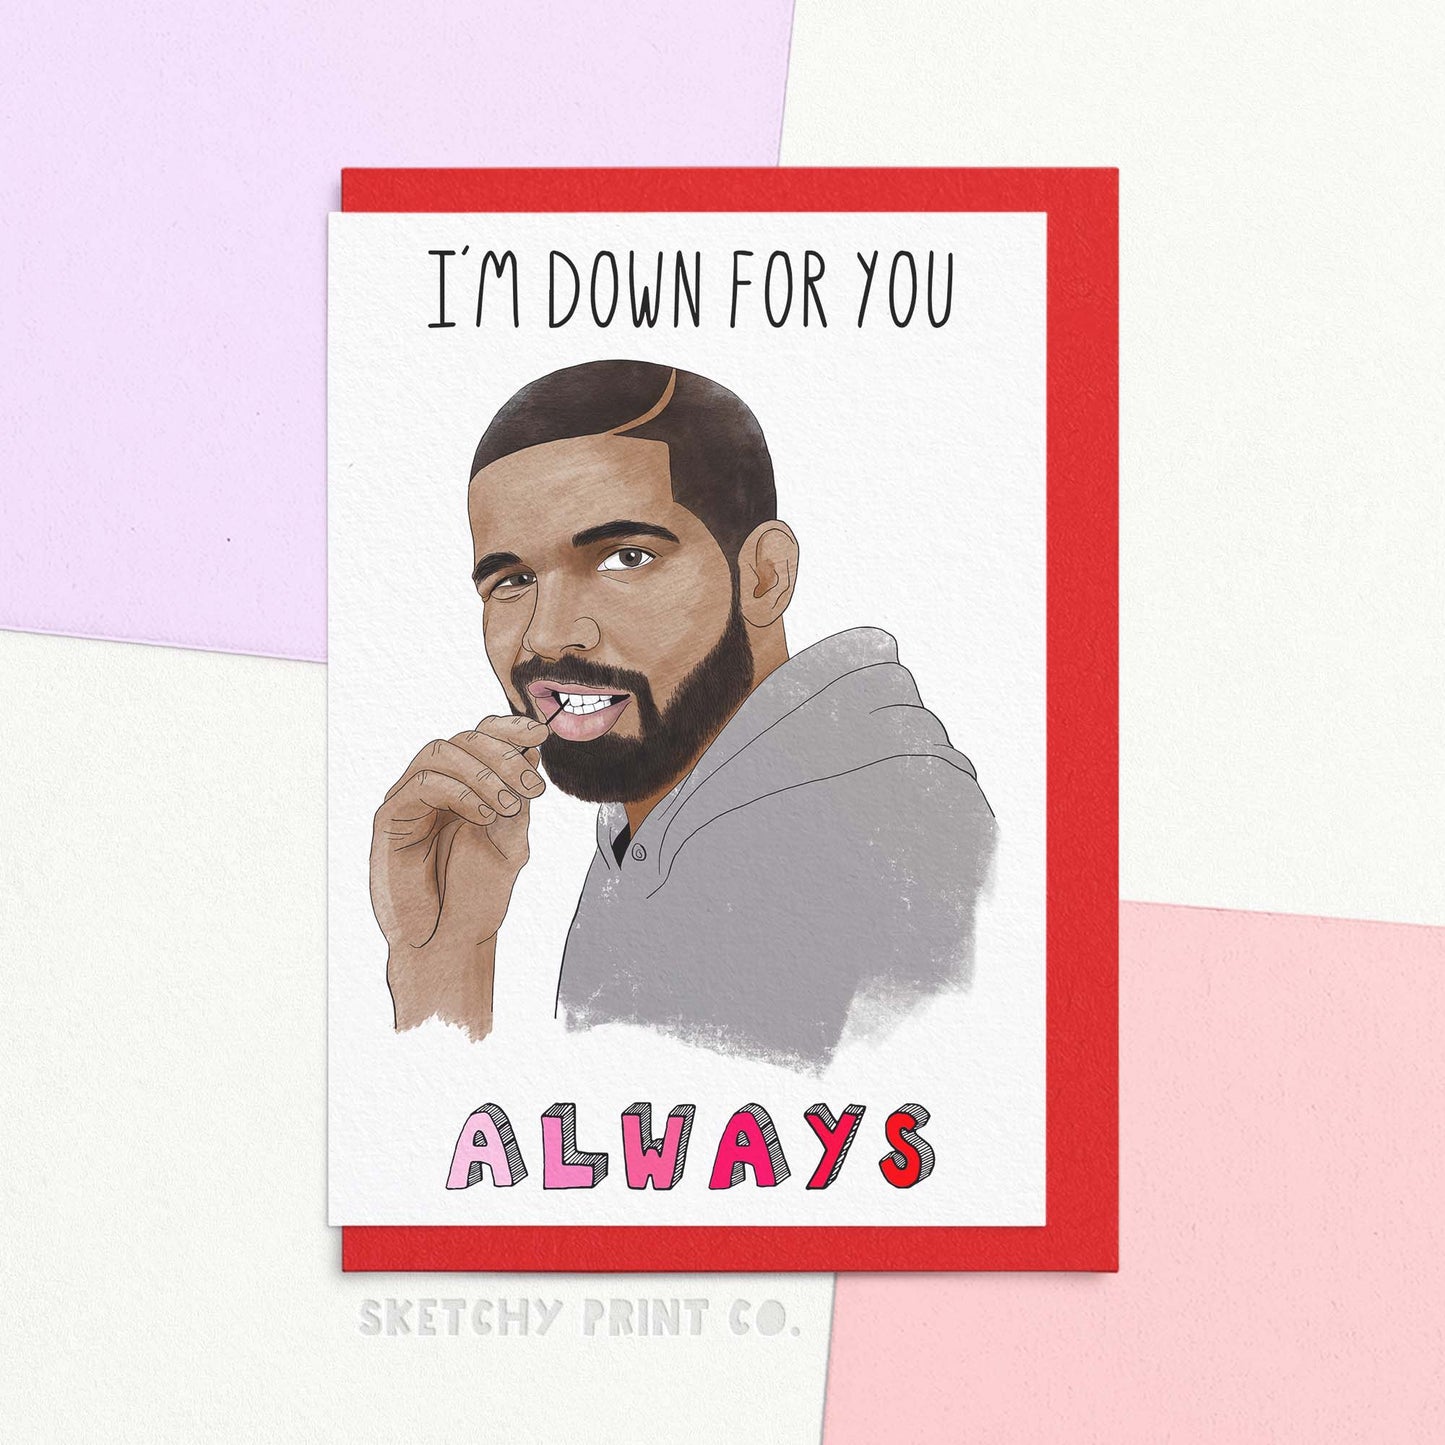 funny valentines day card reading I'm down for you ALWAYS. Perfect valentines messages for boyfriend or Valentine's Day cards for her.